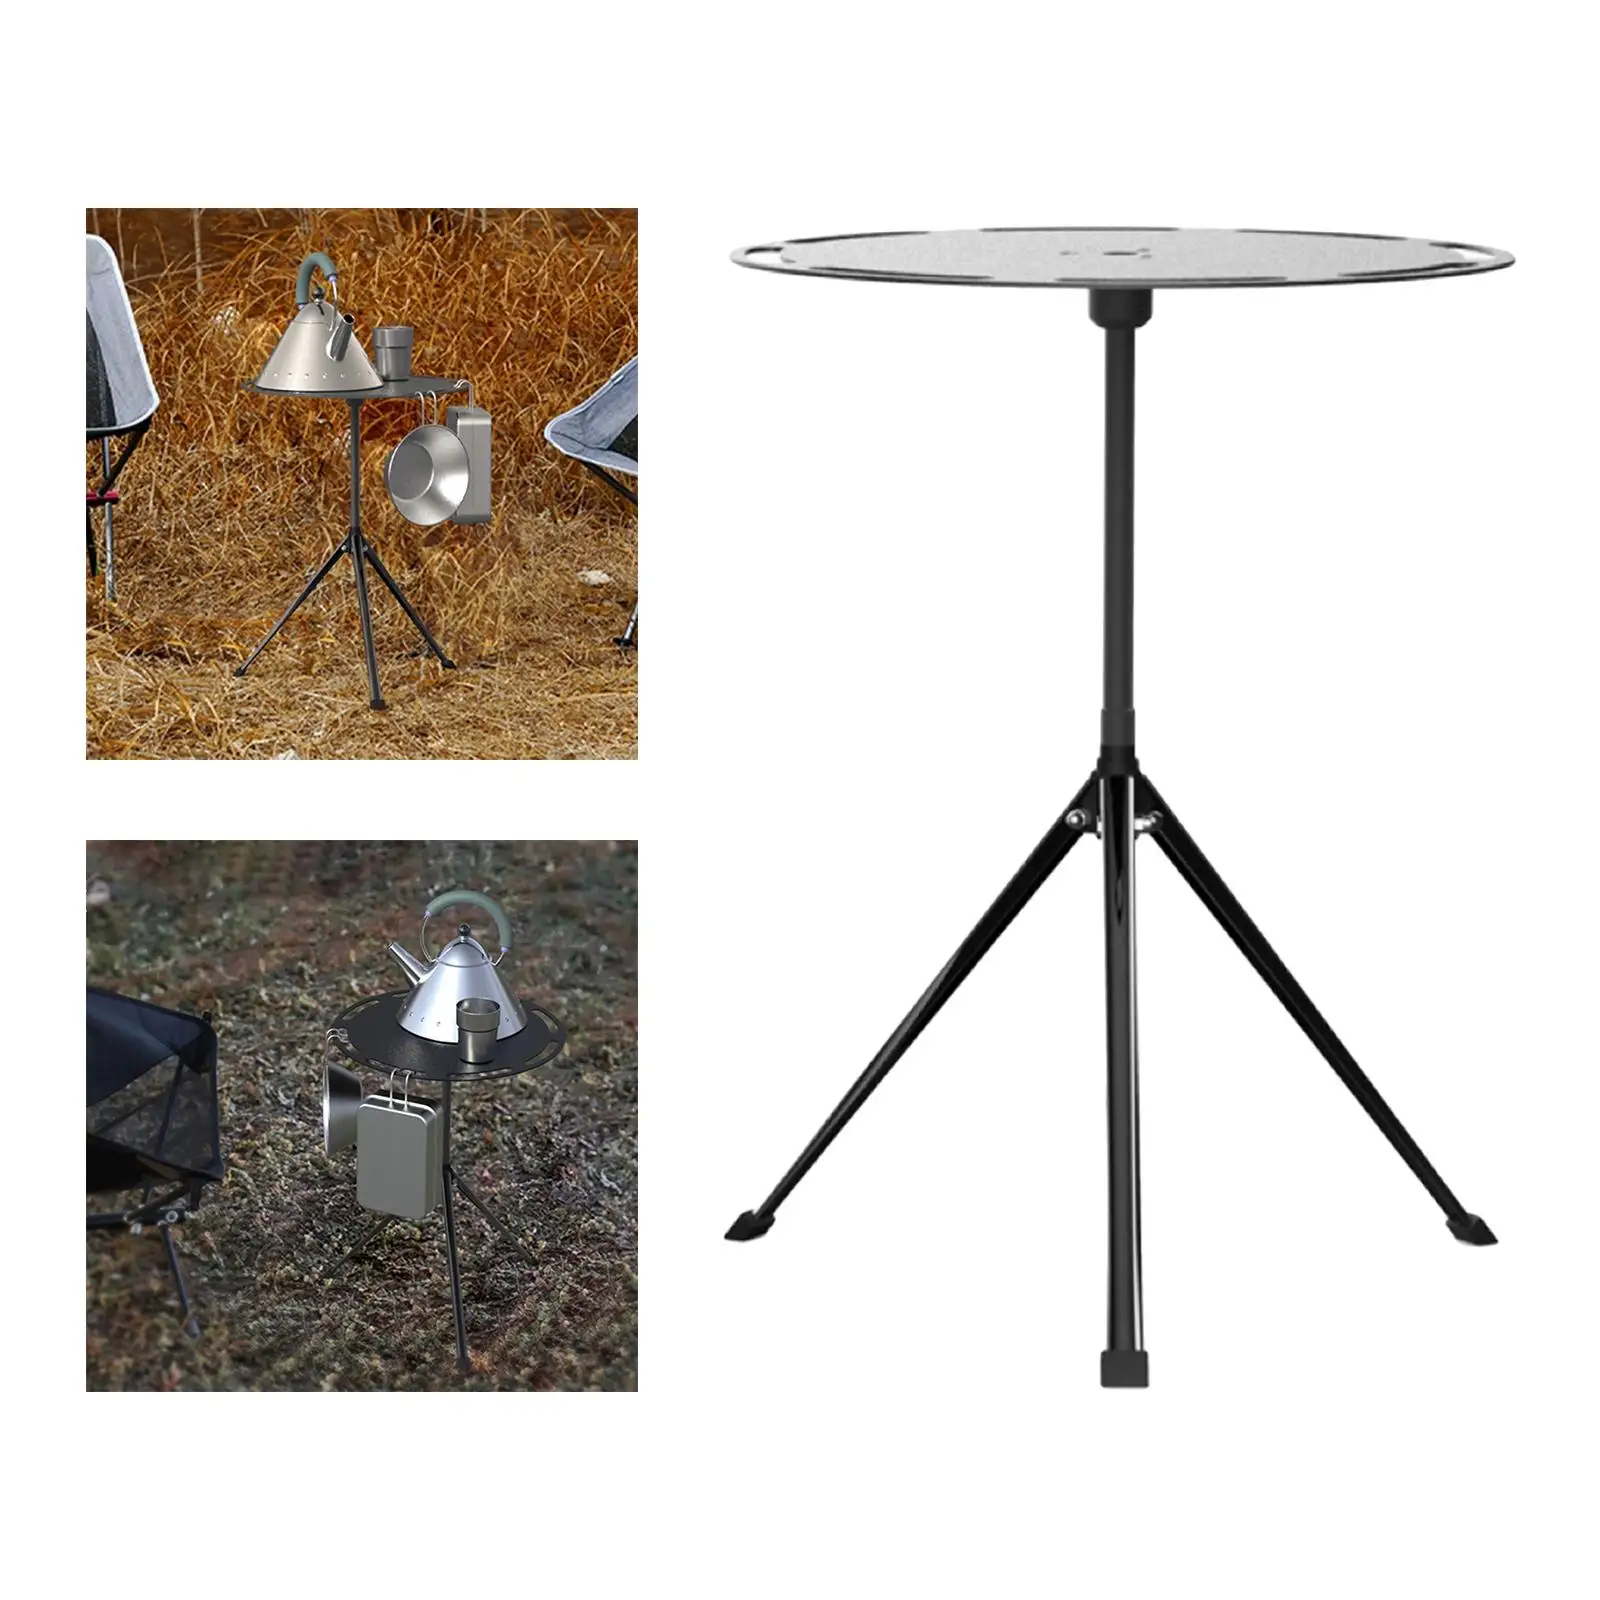 Retractable Camping Table, Furniture Durable  Dining Table Three Legged Folding Desk for Picnic  Kitchen BBQ Garden